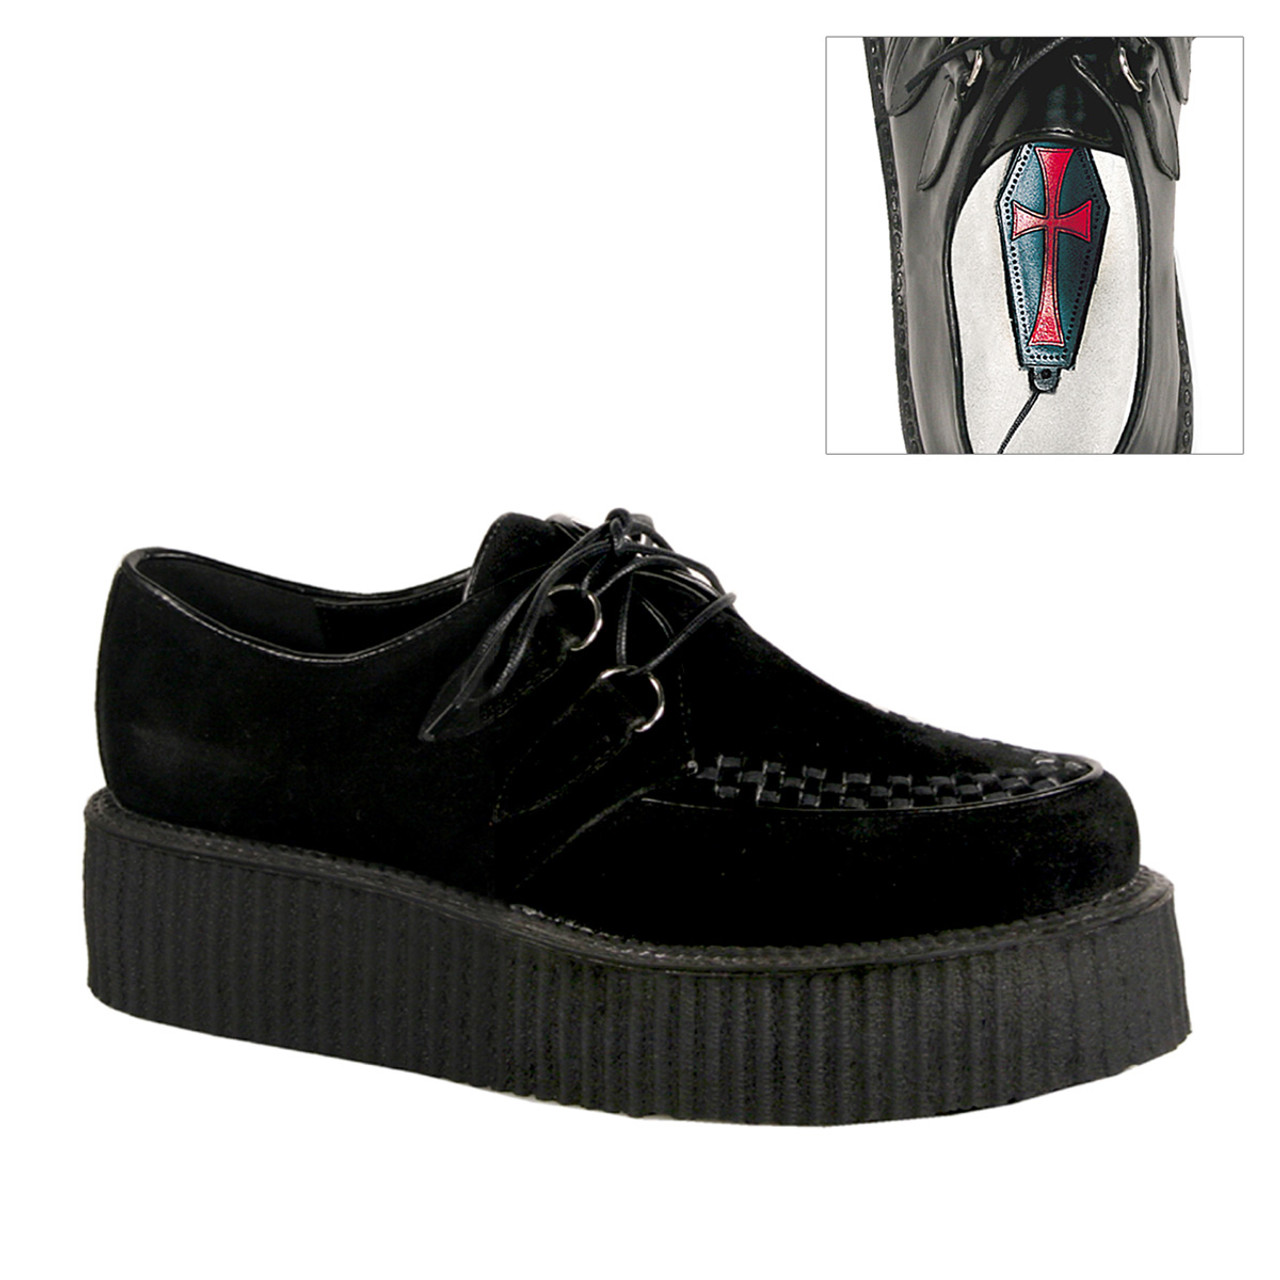 creepers shoes 8s